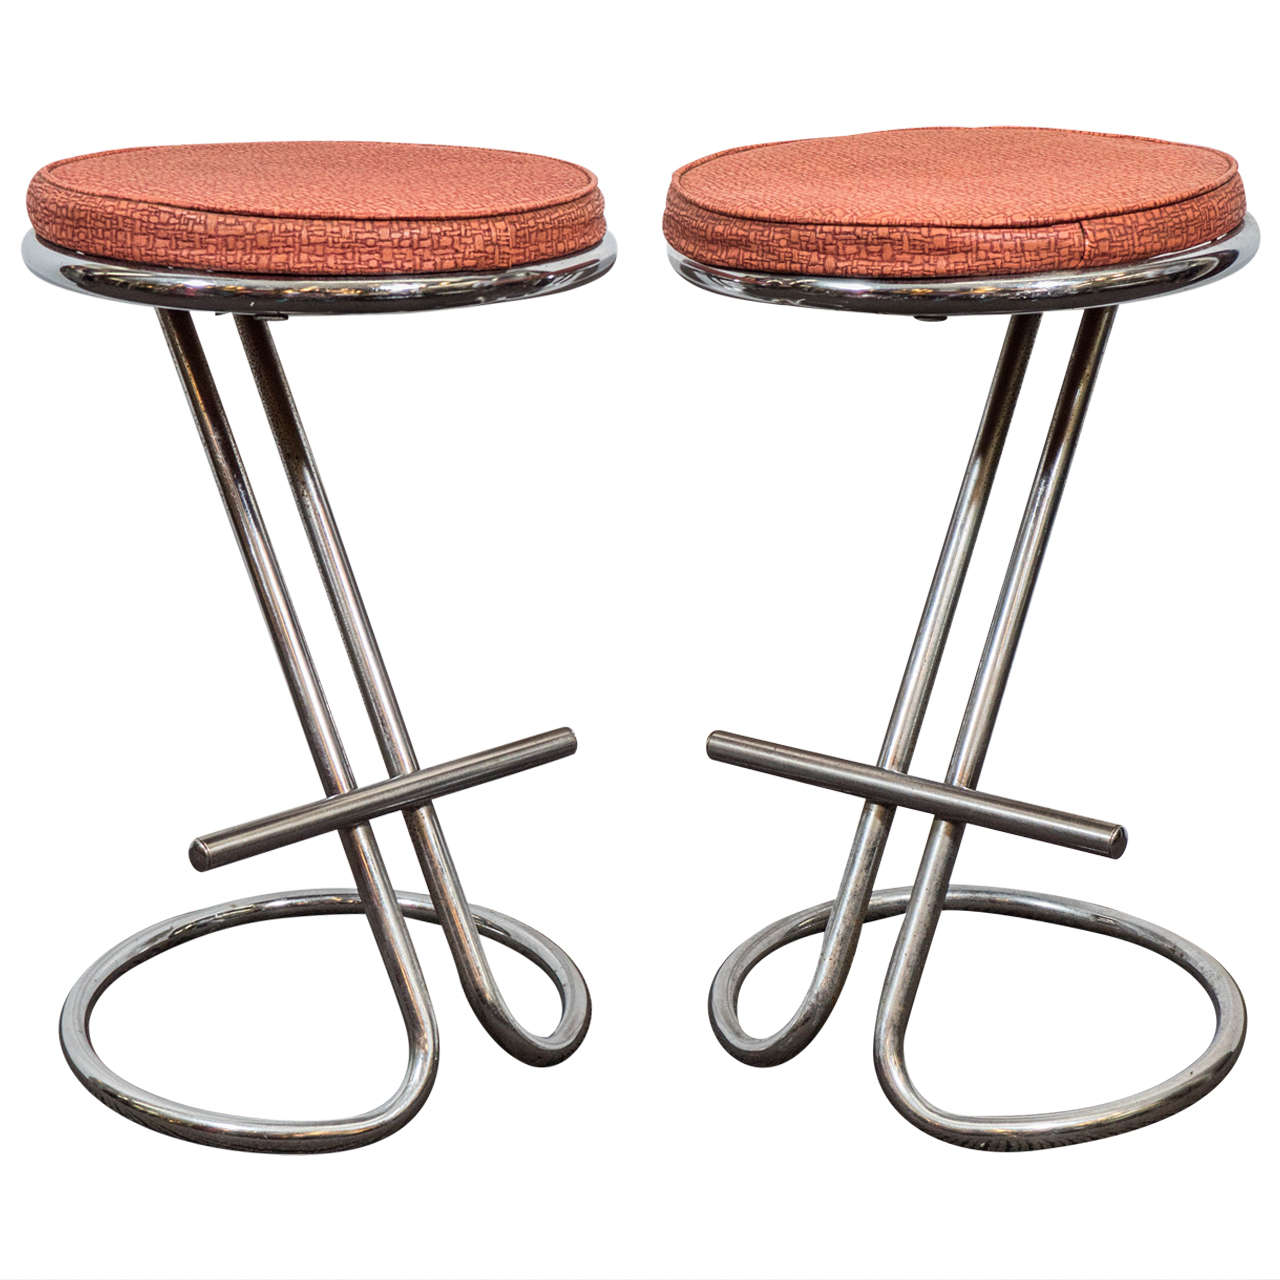 A Pair of Troy Sunshade Art Deco "Z" Stools in the Style of Gilbert Rohde